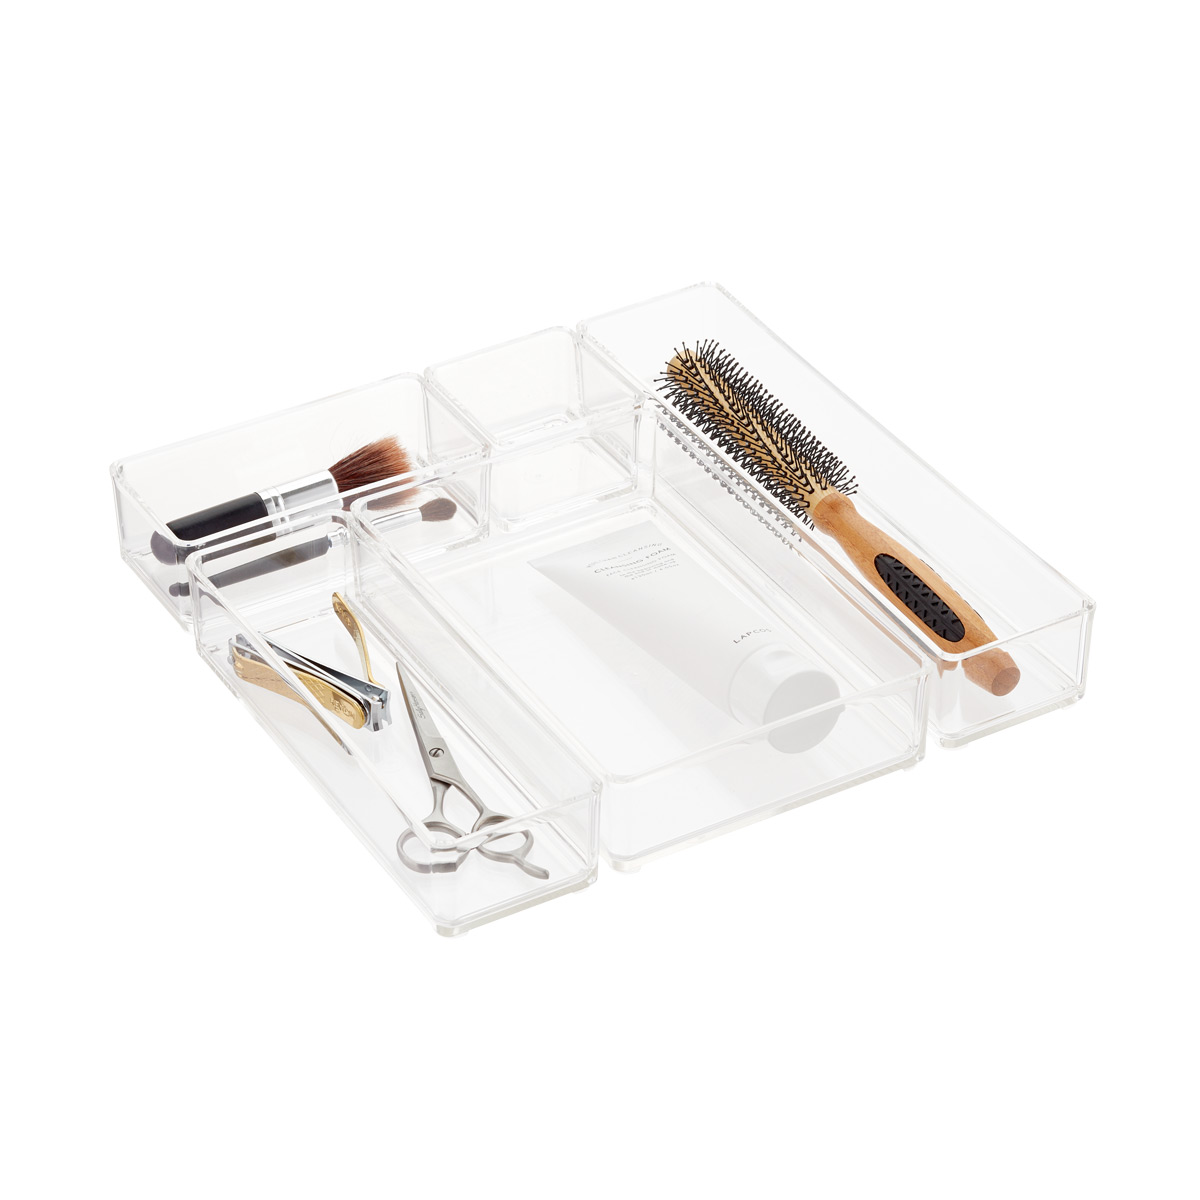 https://www.containerstore.com/catalogimages/340623/10074300-stacking-drawer-organizers-.jpg